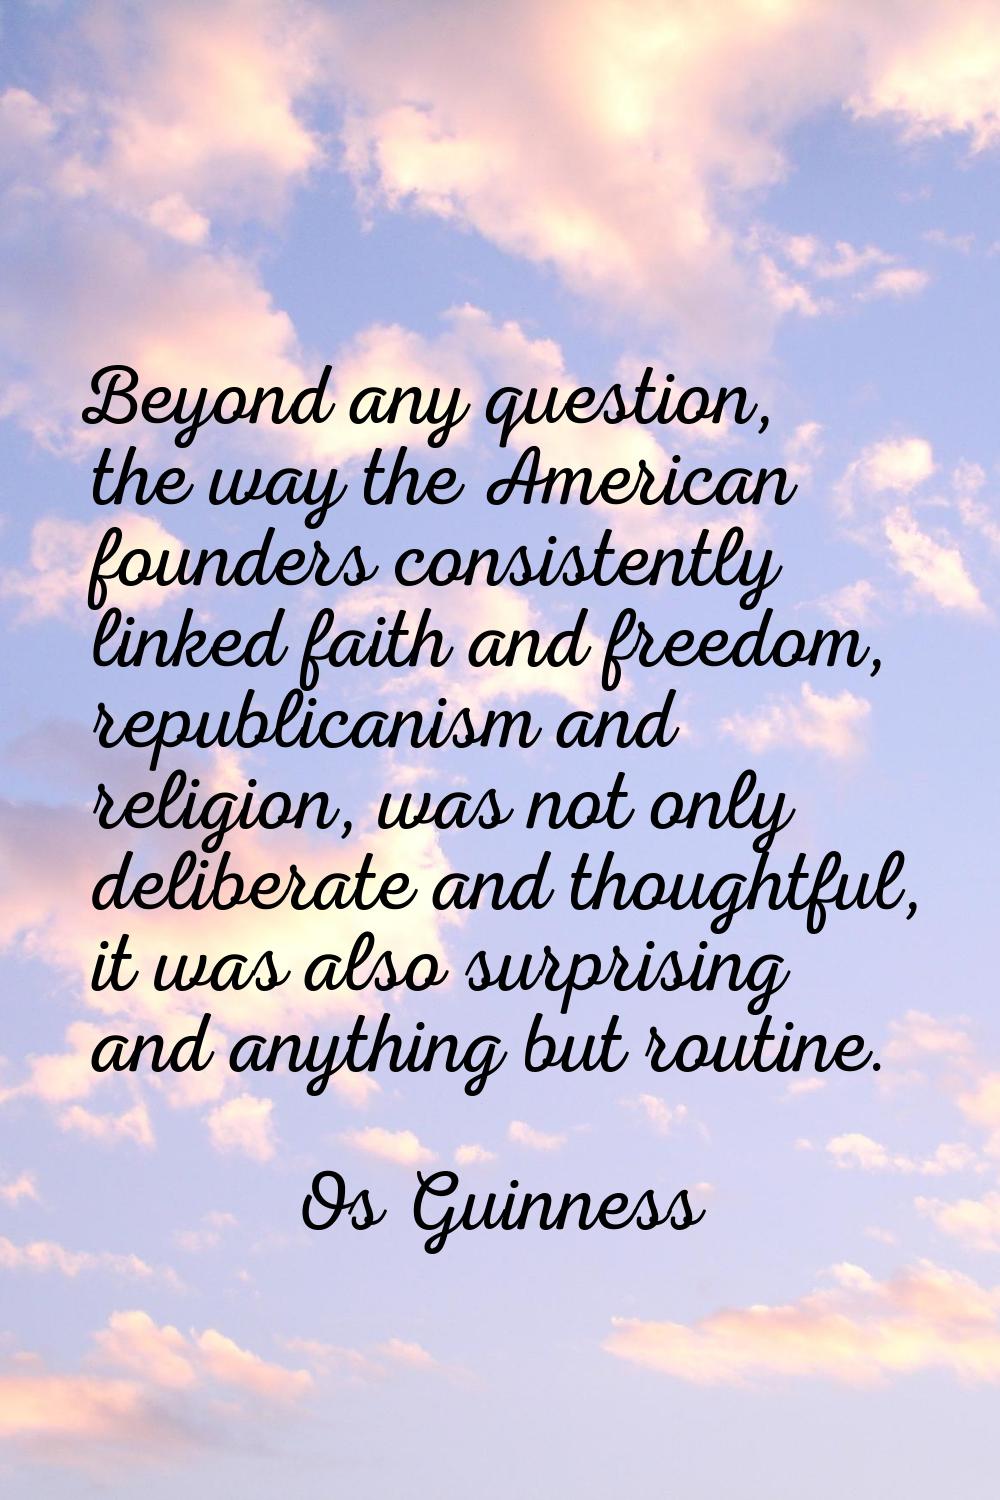 Beyond any question, the way the American founders consistently linked faith and freedom, republica